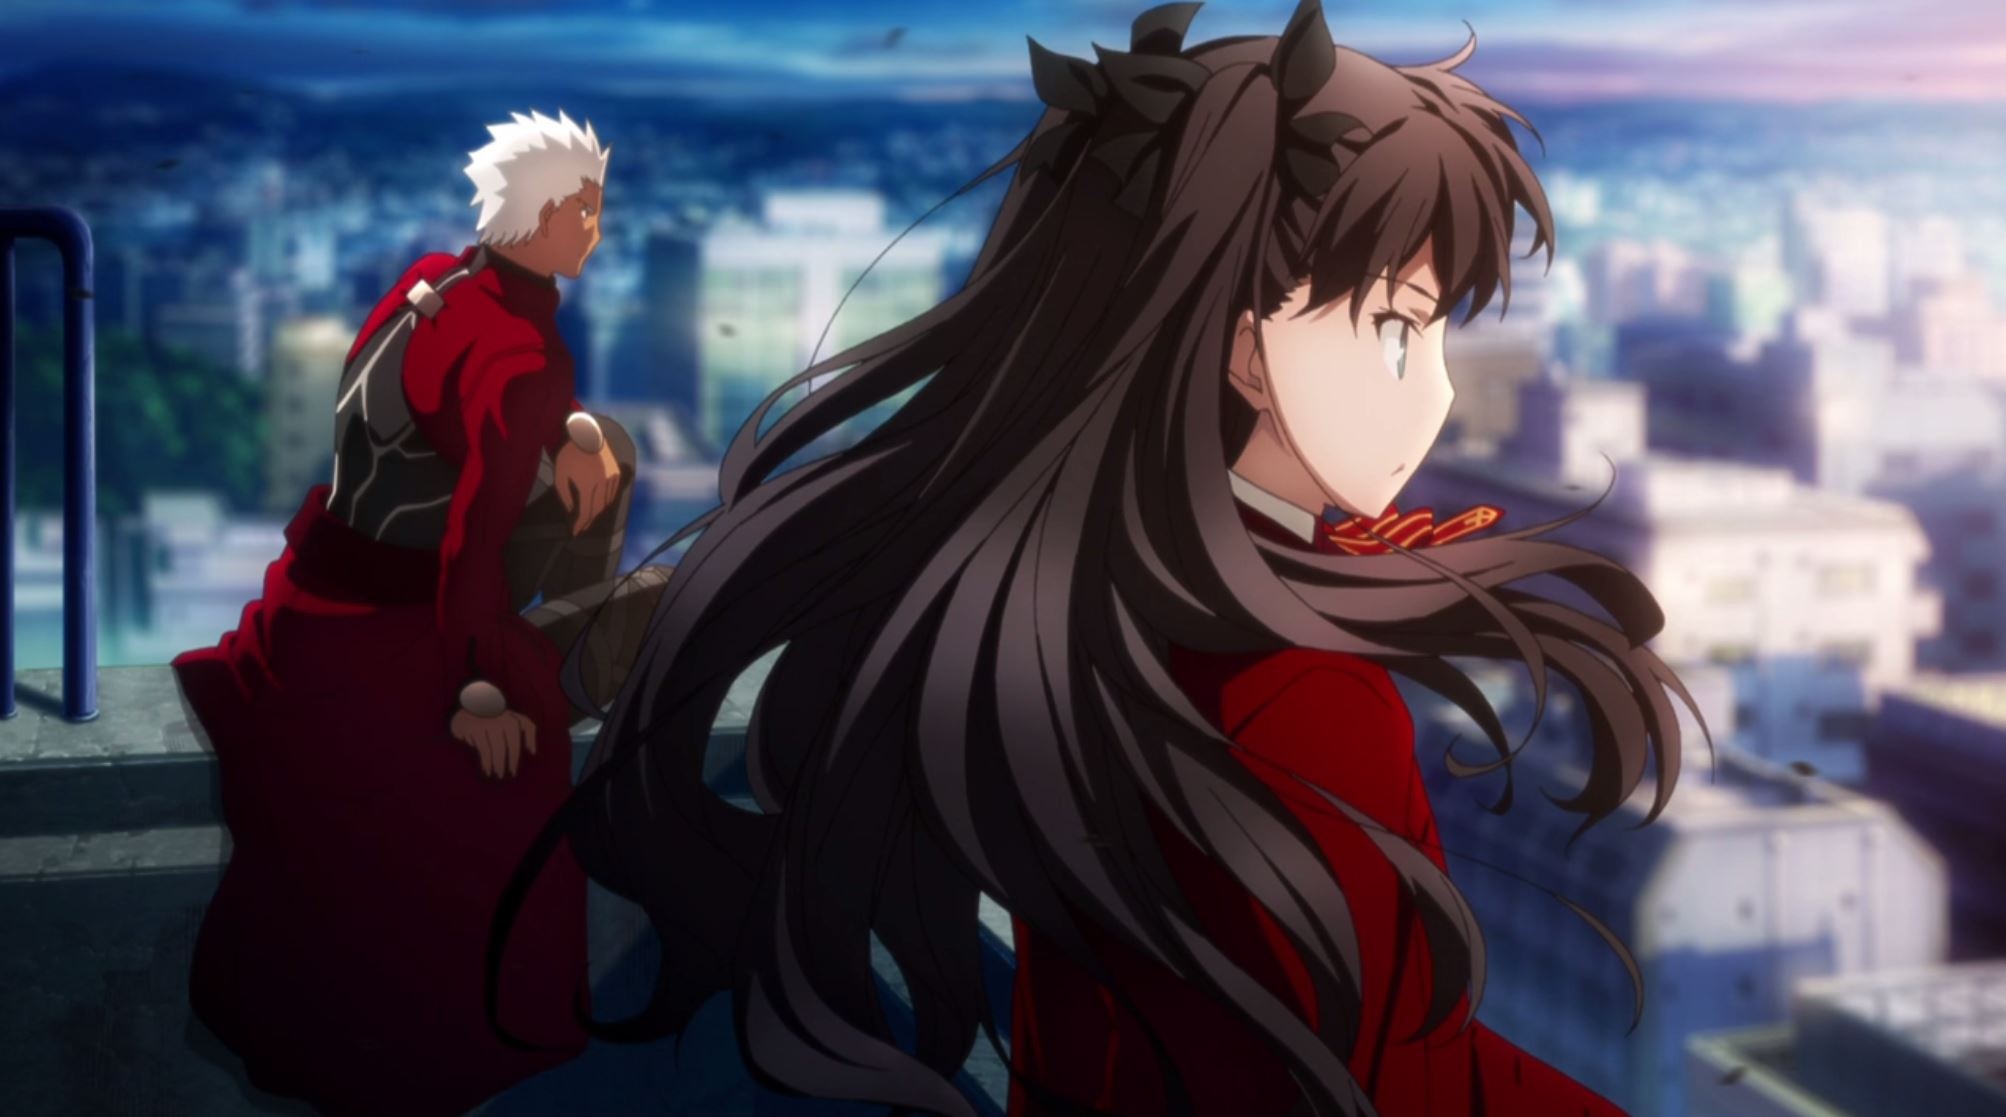 Fate/stay night: Unlimited Blade Works Wallpapers (44+ images inside)